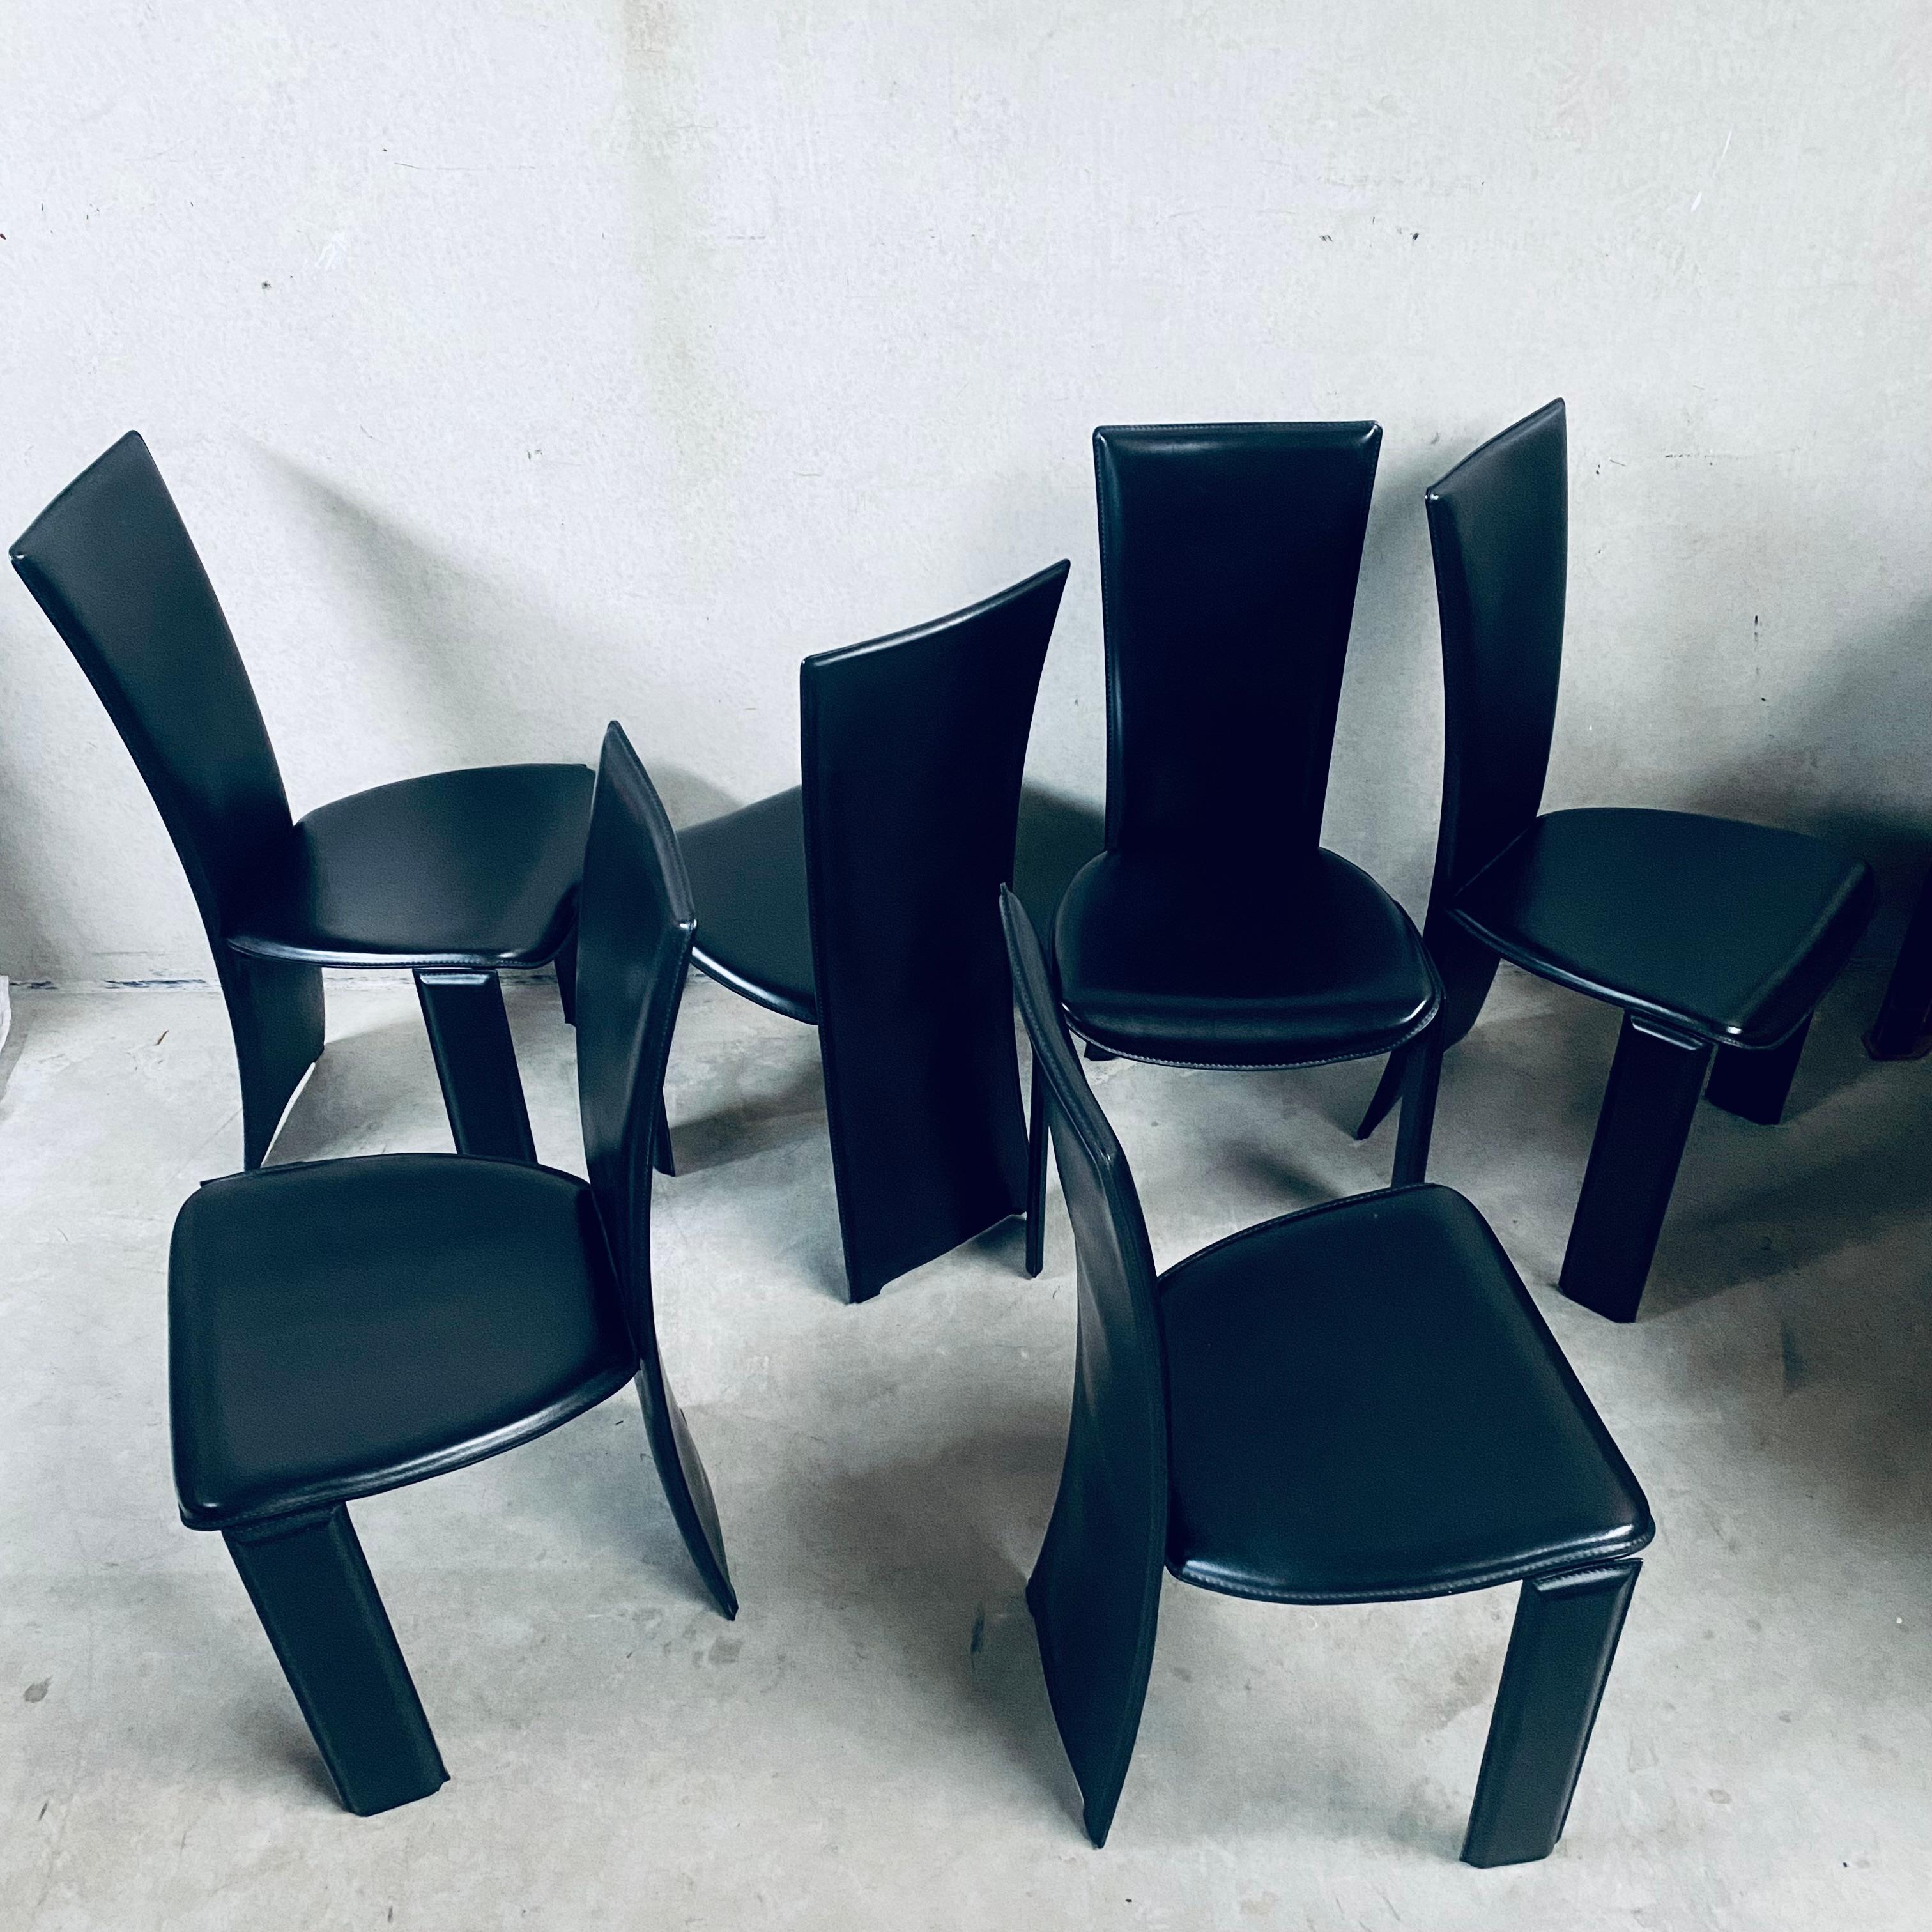 Introducing a Timeless Classic: Set of Six Black Leather Tripot Dining Chairs by Pietro Costantini, Italy 1980

Elevate your dining experience with our exquisite set of six black leather Tripot dining chairs designed by the renowned Pietro